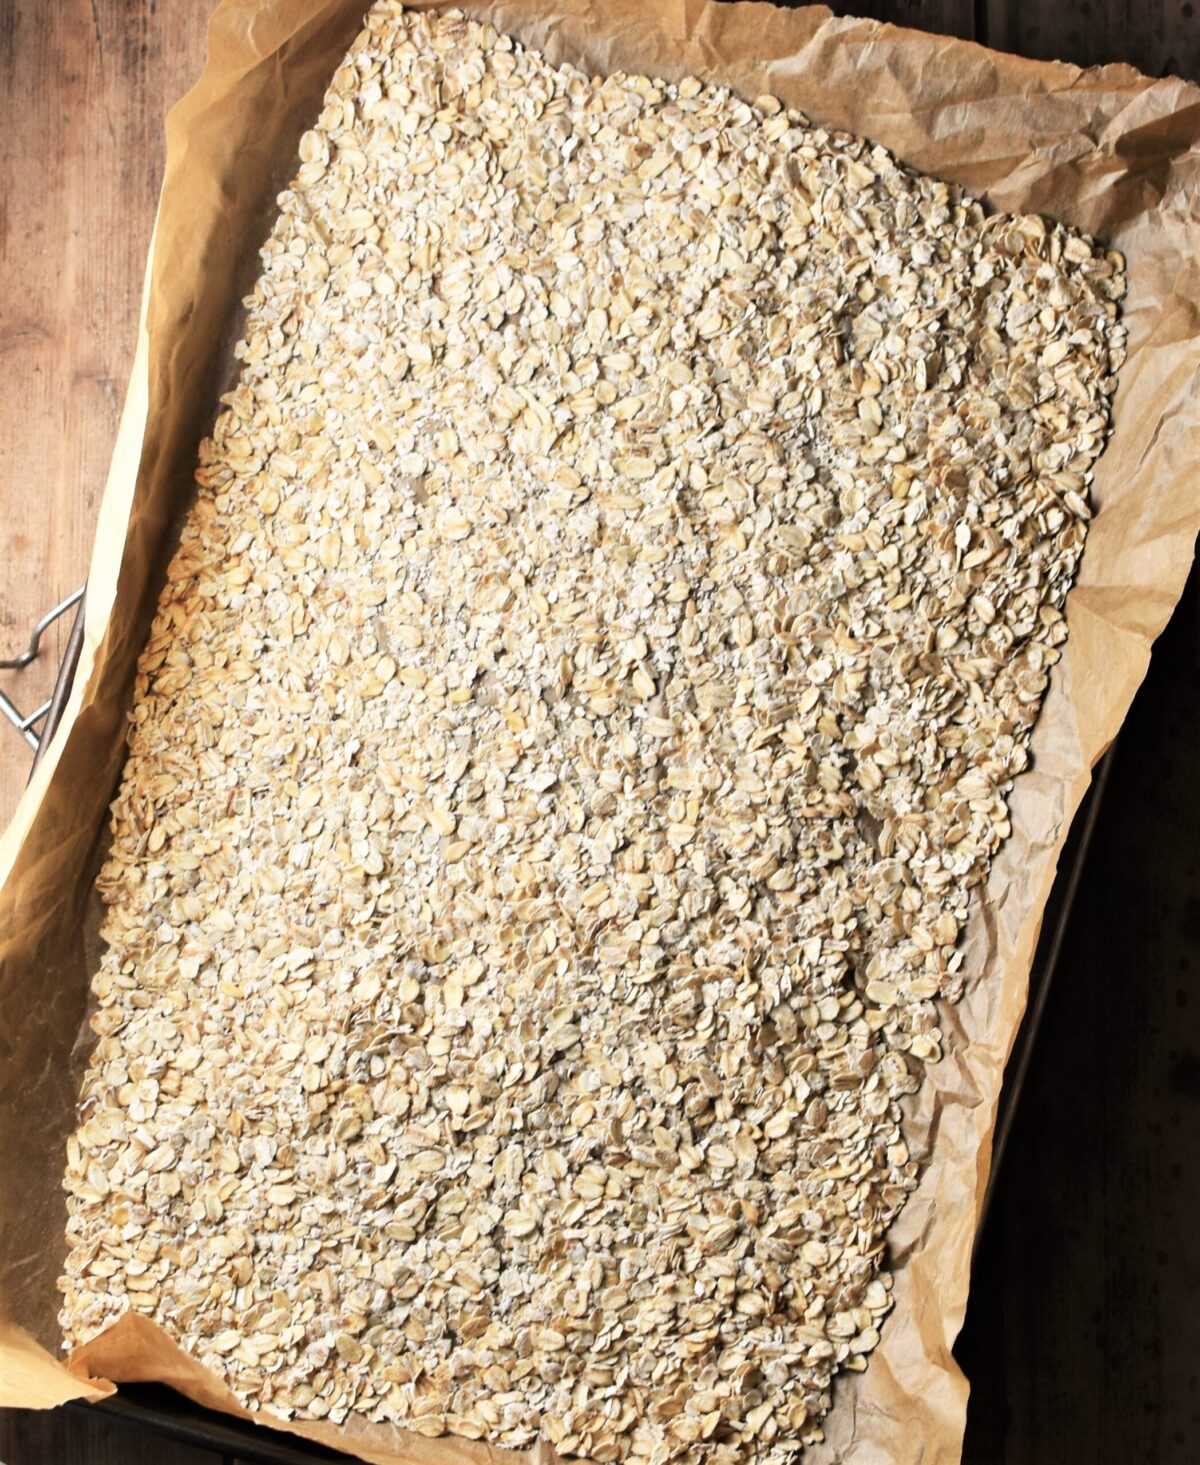 Oats spread over a baking sheet lined with parchment.